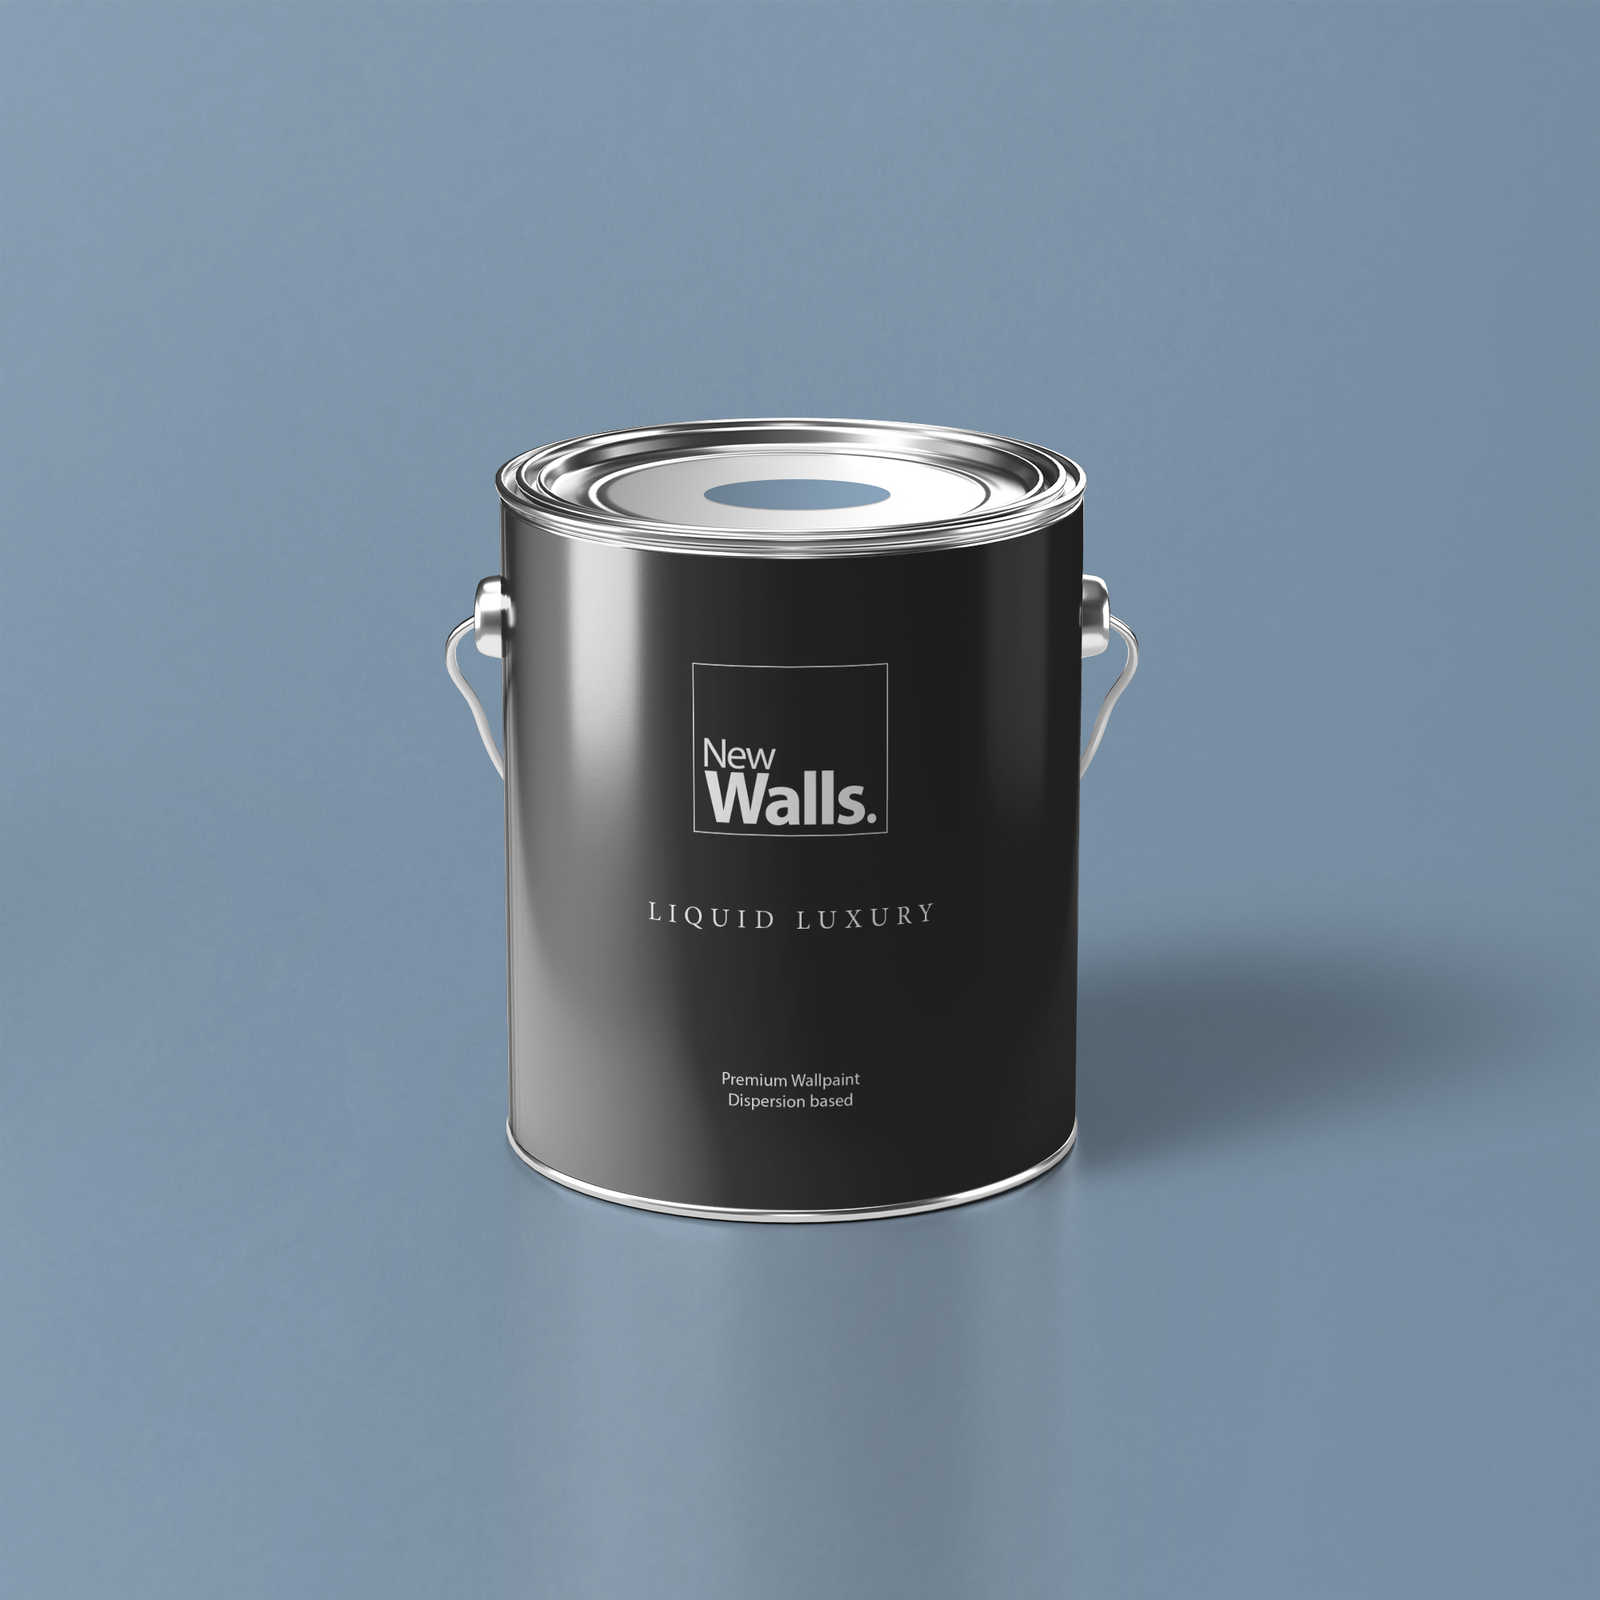 Premium Wall Paint Balanced Nordic Blue »Blissful Blue« NW305 – 5 litre
